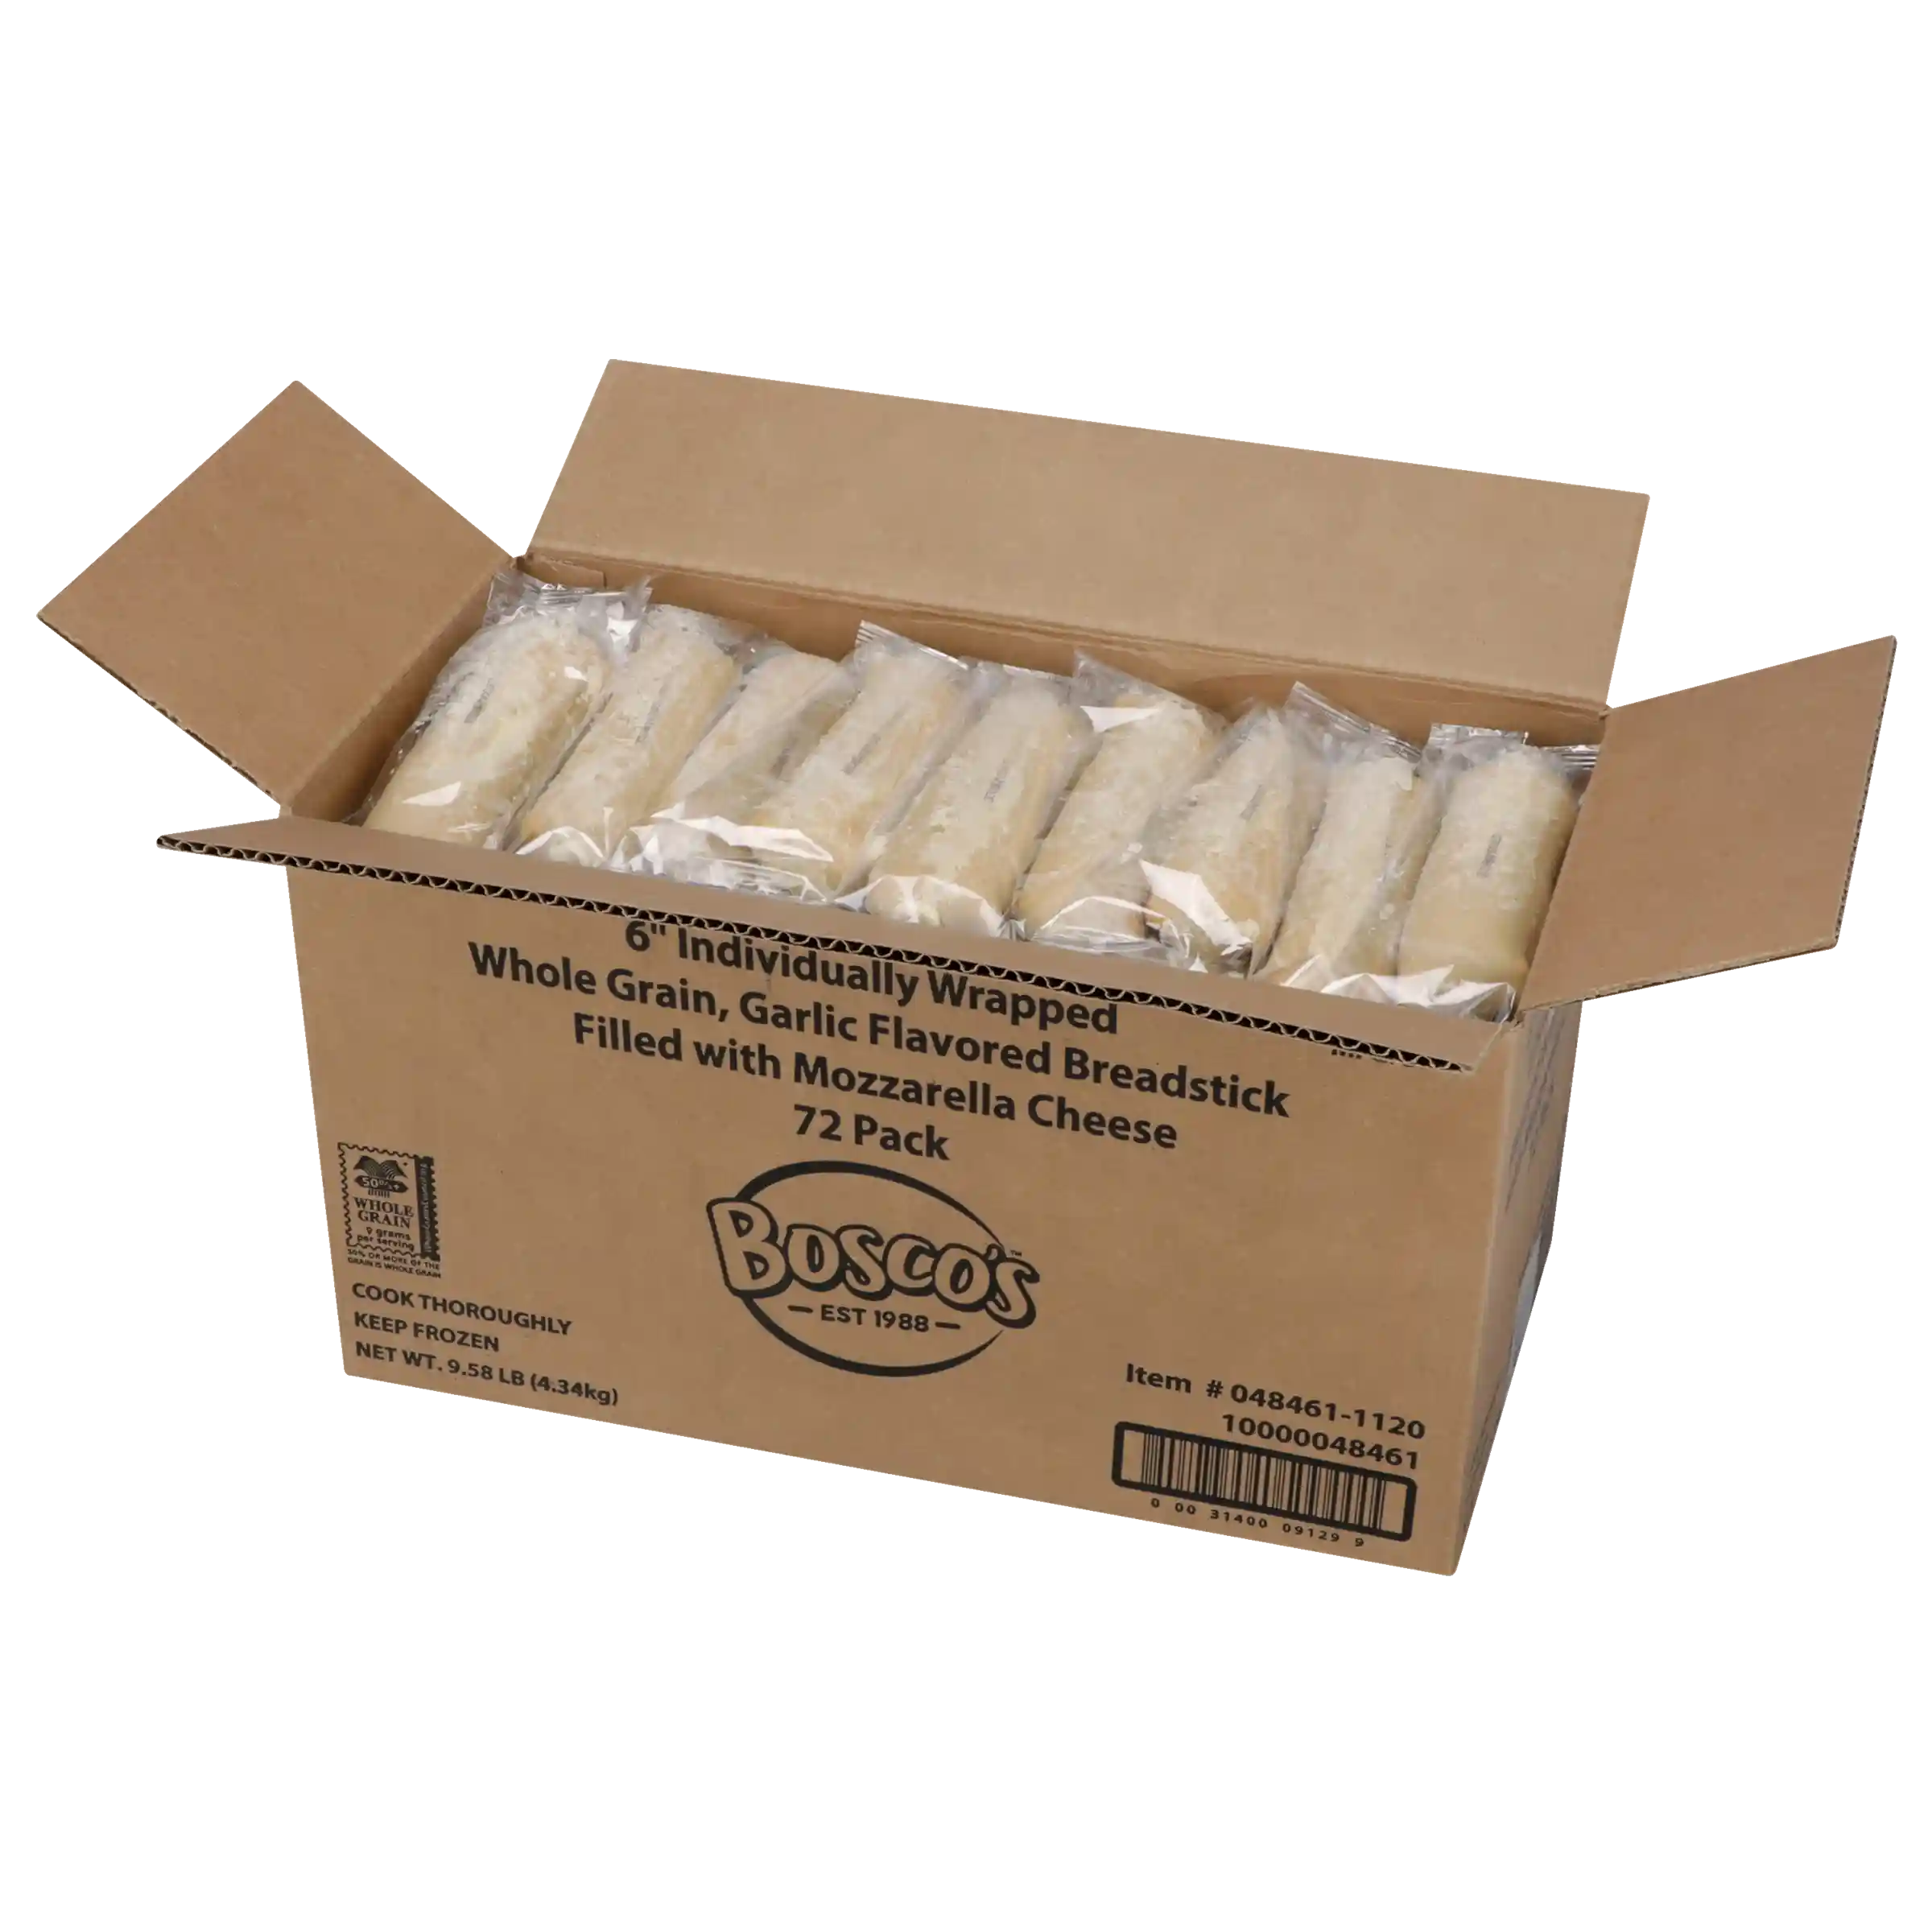 Bosco® Individually Wrapped Whole Grain Garlic Flavored Cheese Stuffed Breadsticks, 2.23 oz._image_31